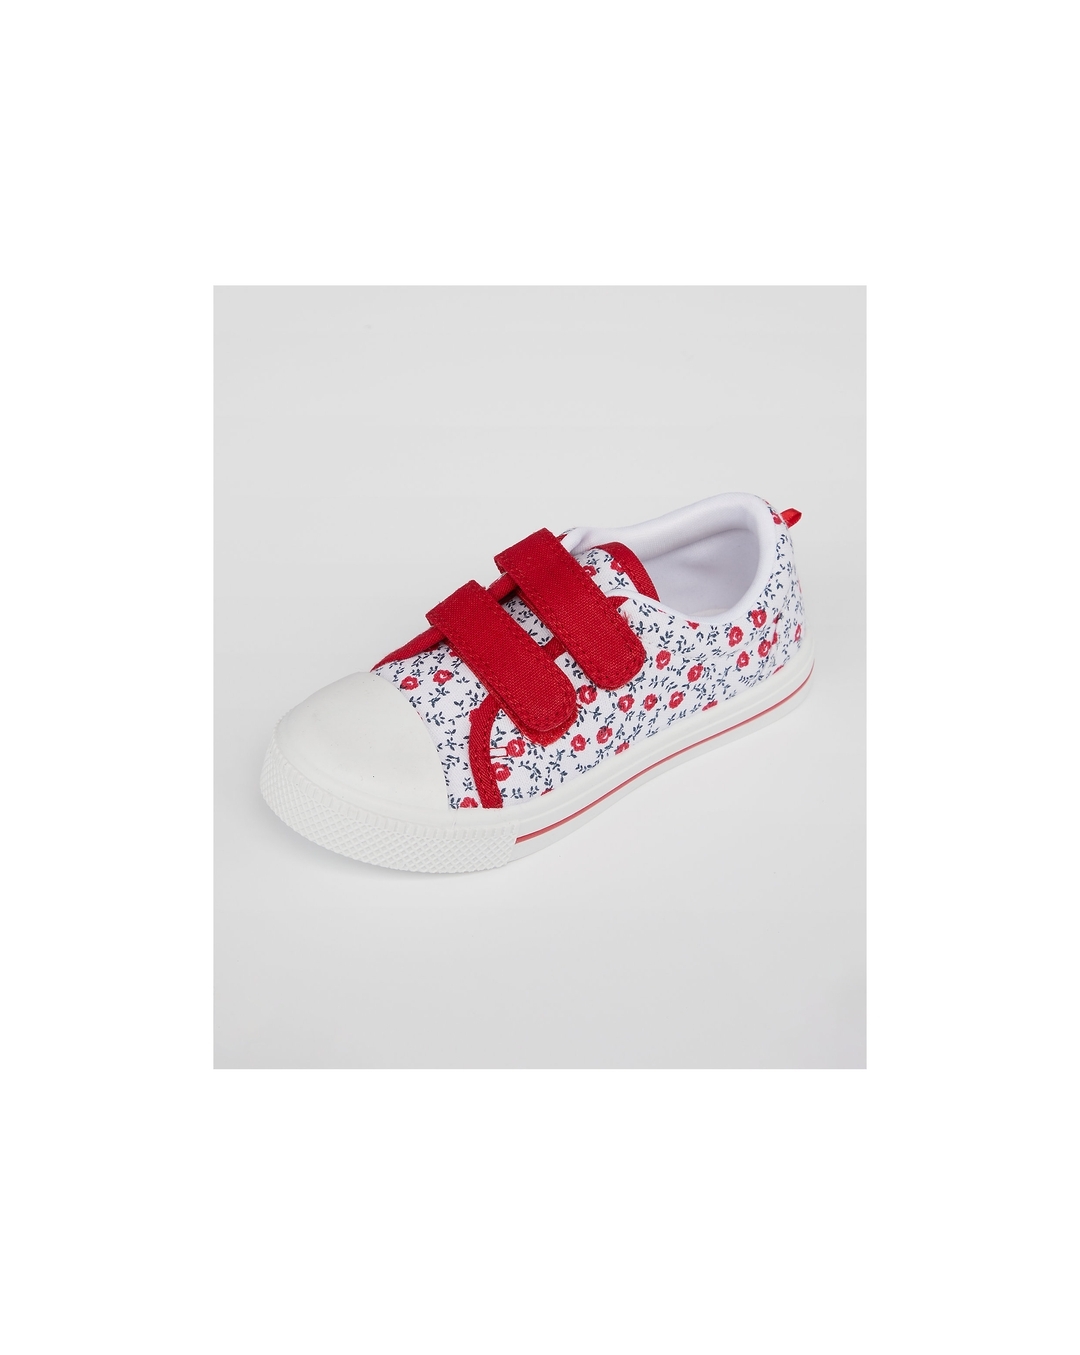 Shop Online Red Canvas First Walkers Soft Sole Anti-Slip Baby Shoes Sneakers  (12-14 Months) at ₹599